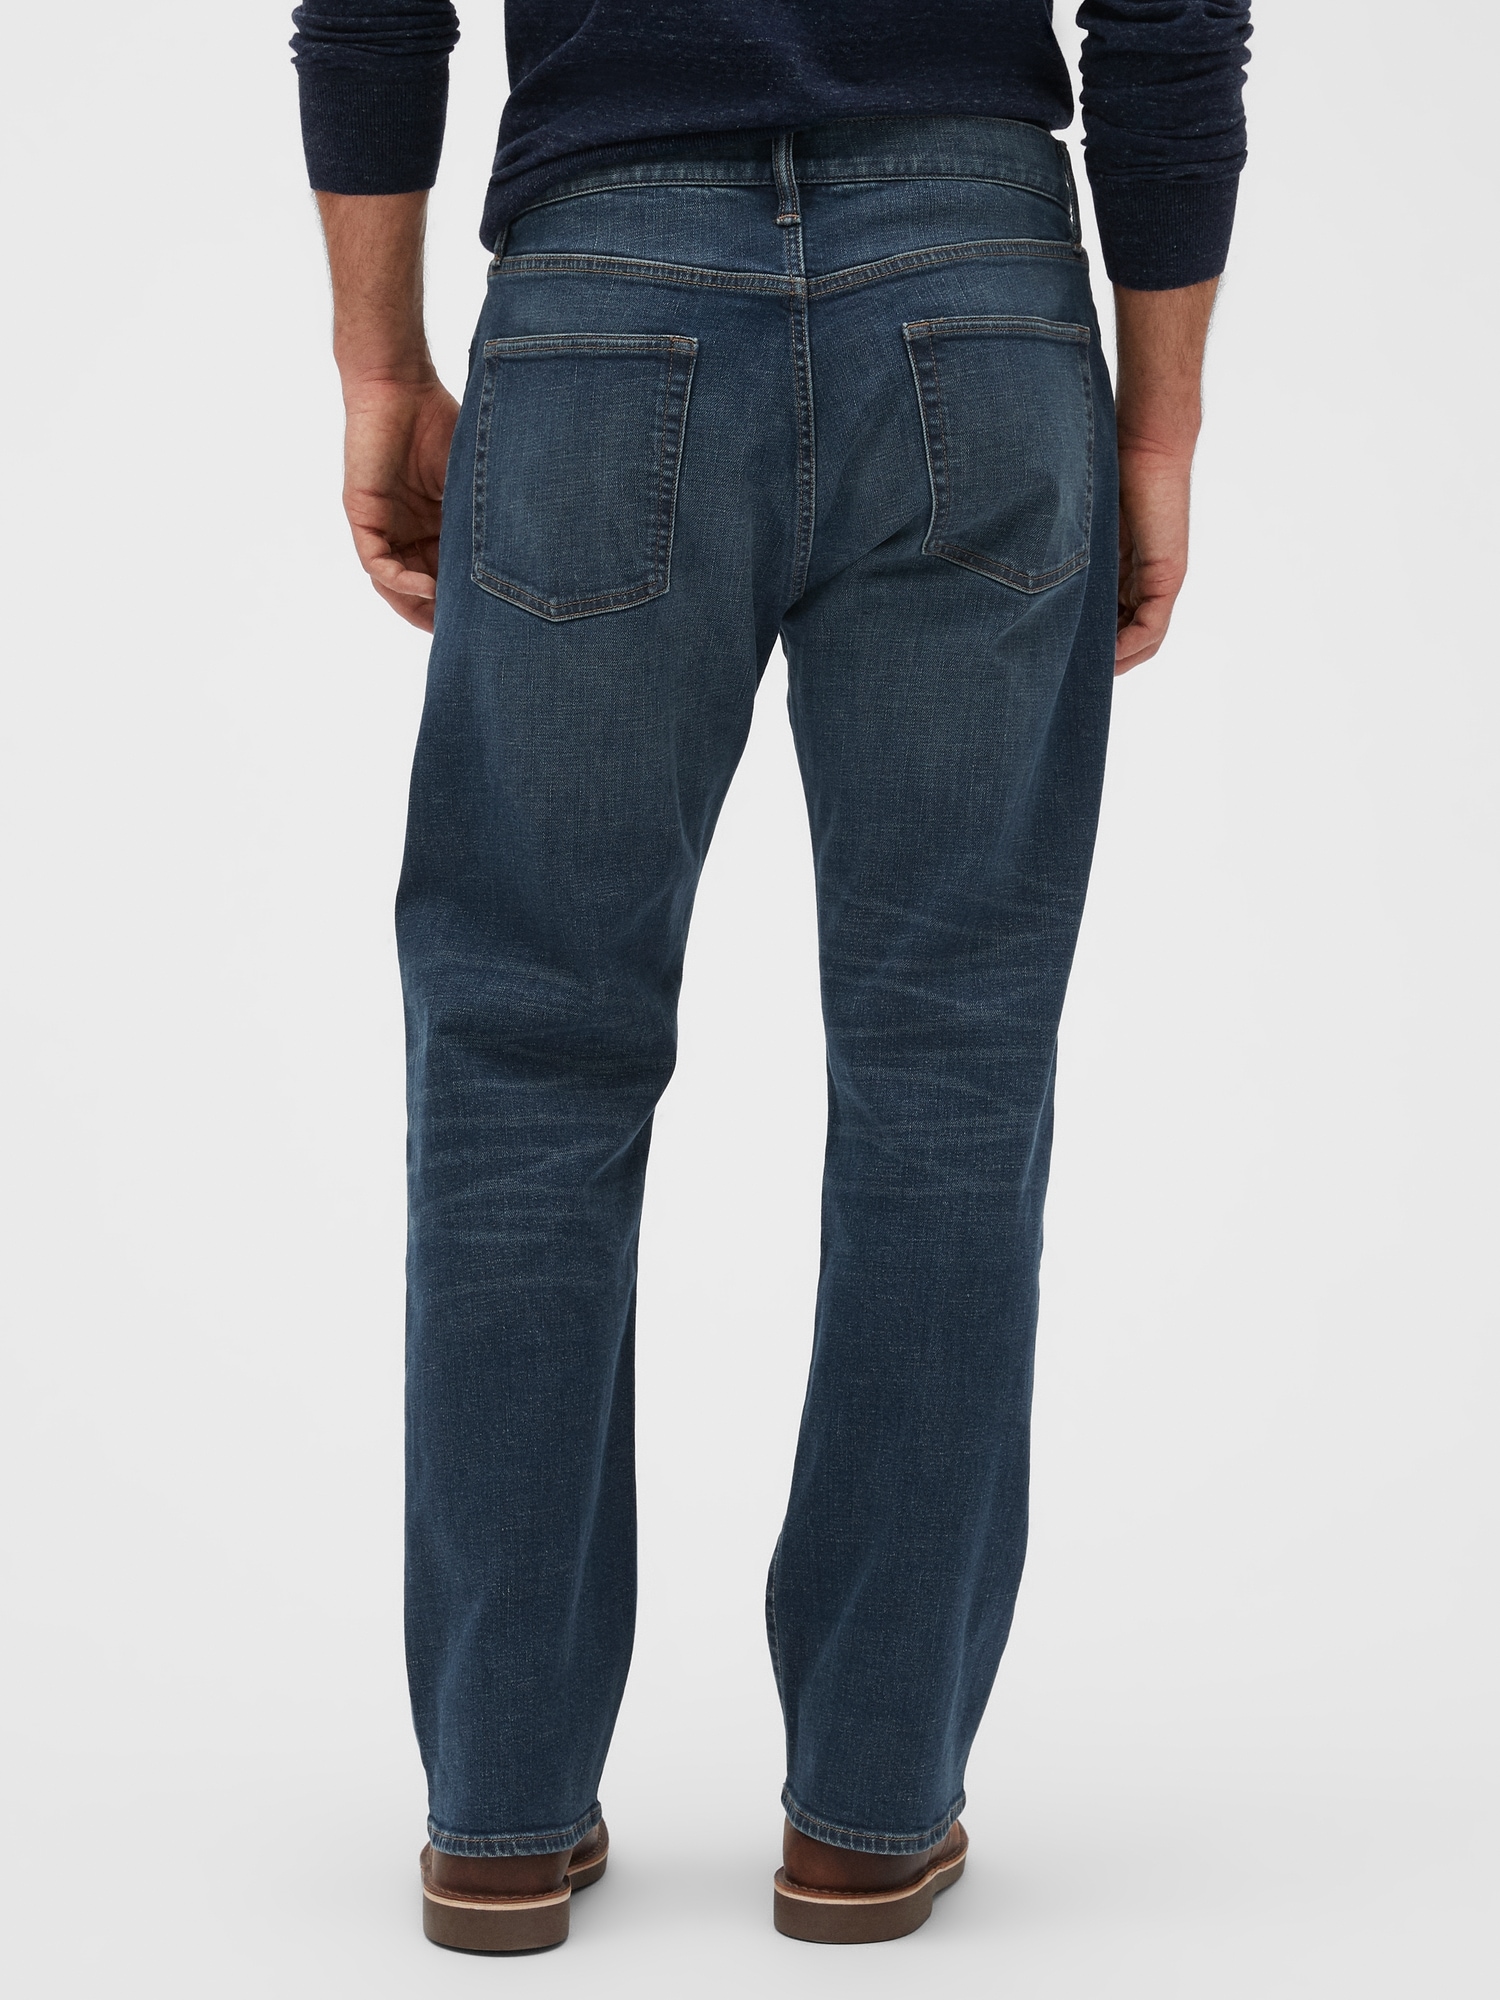 Relaxed Jeans with Washwell | Gap Factory